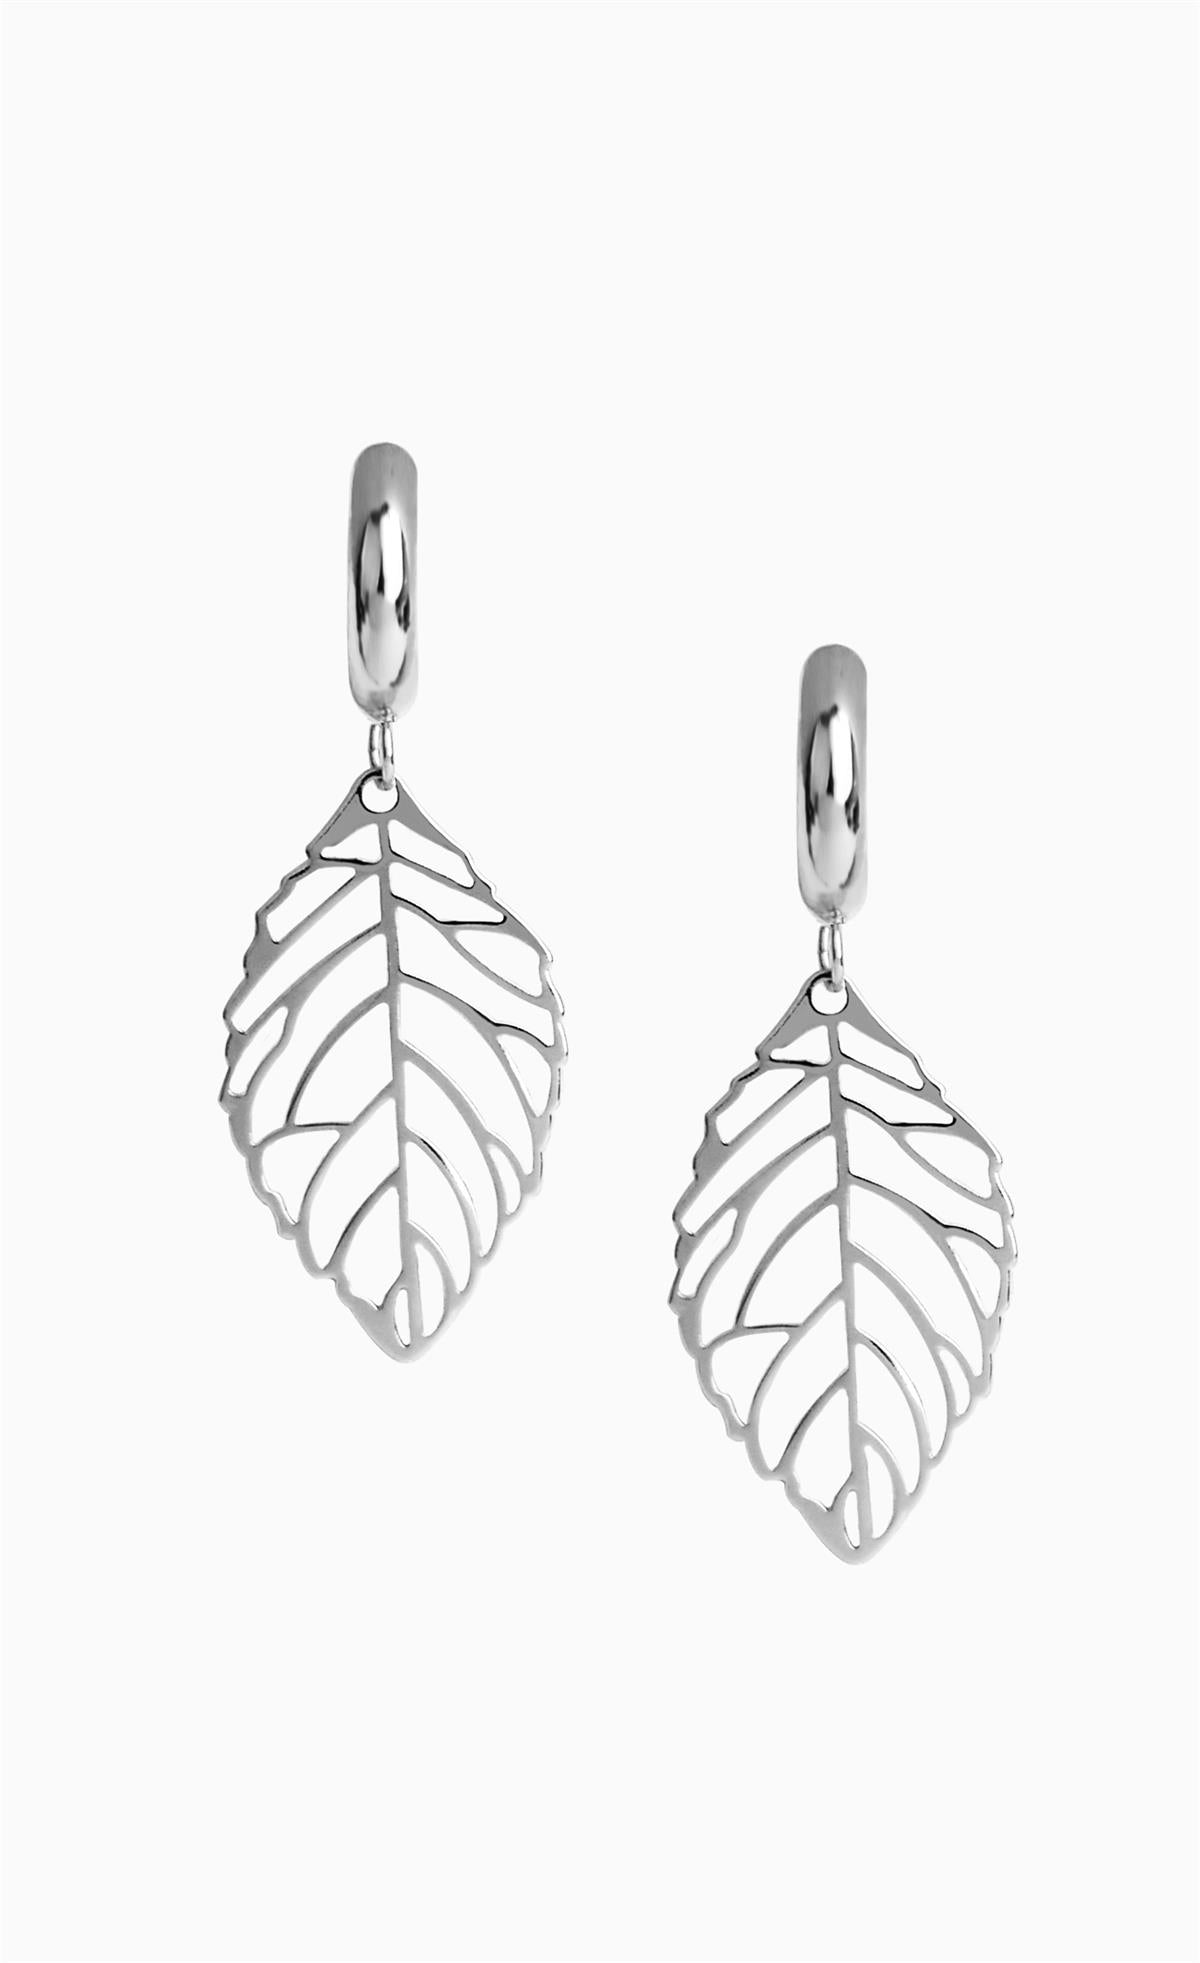 Ring Leaf Earrings Silver Plated